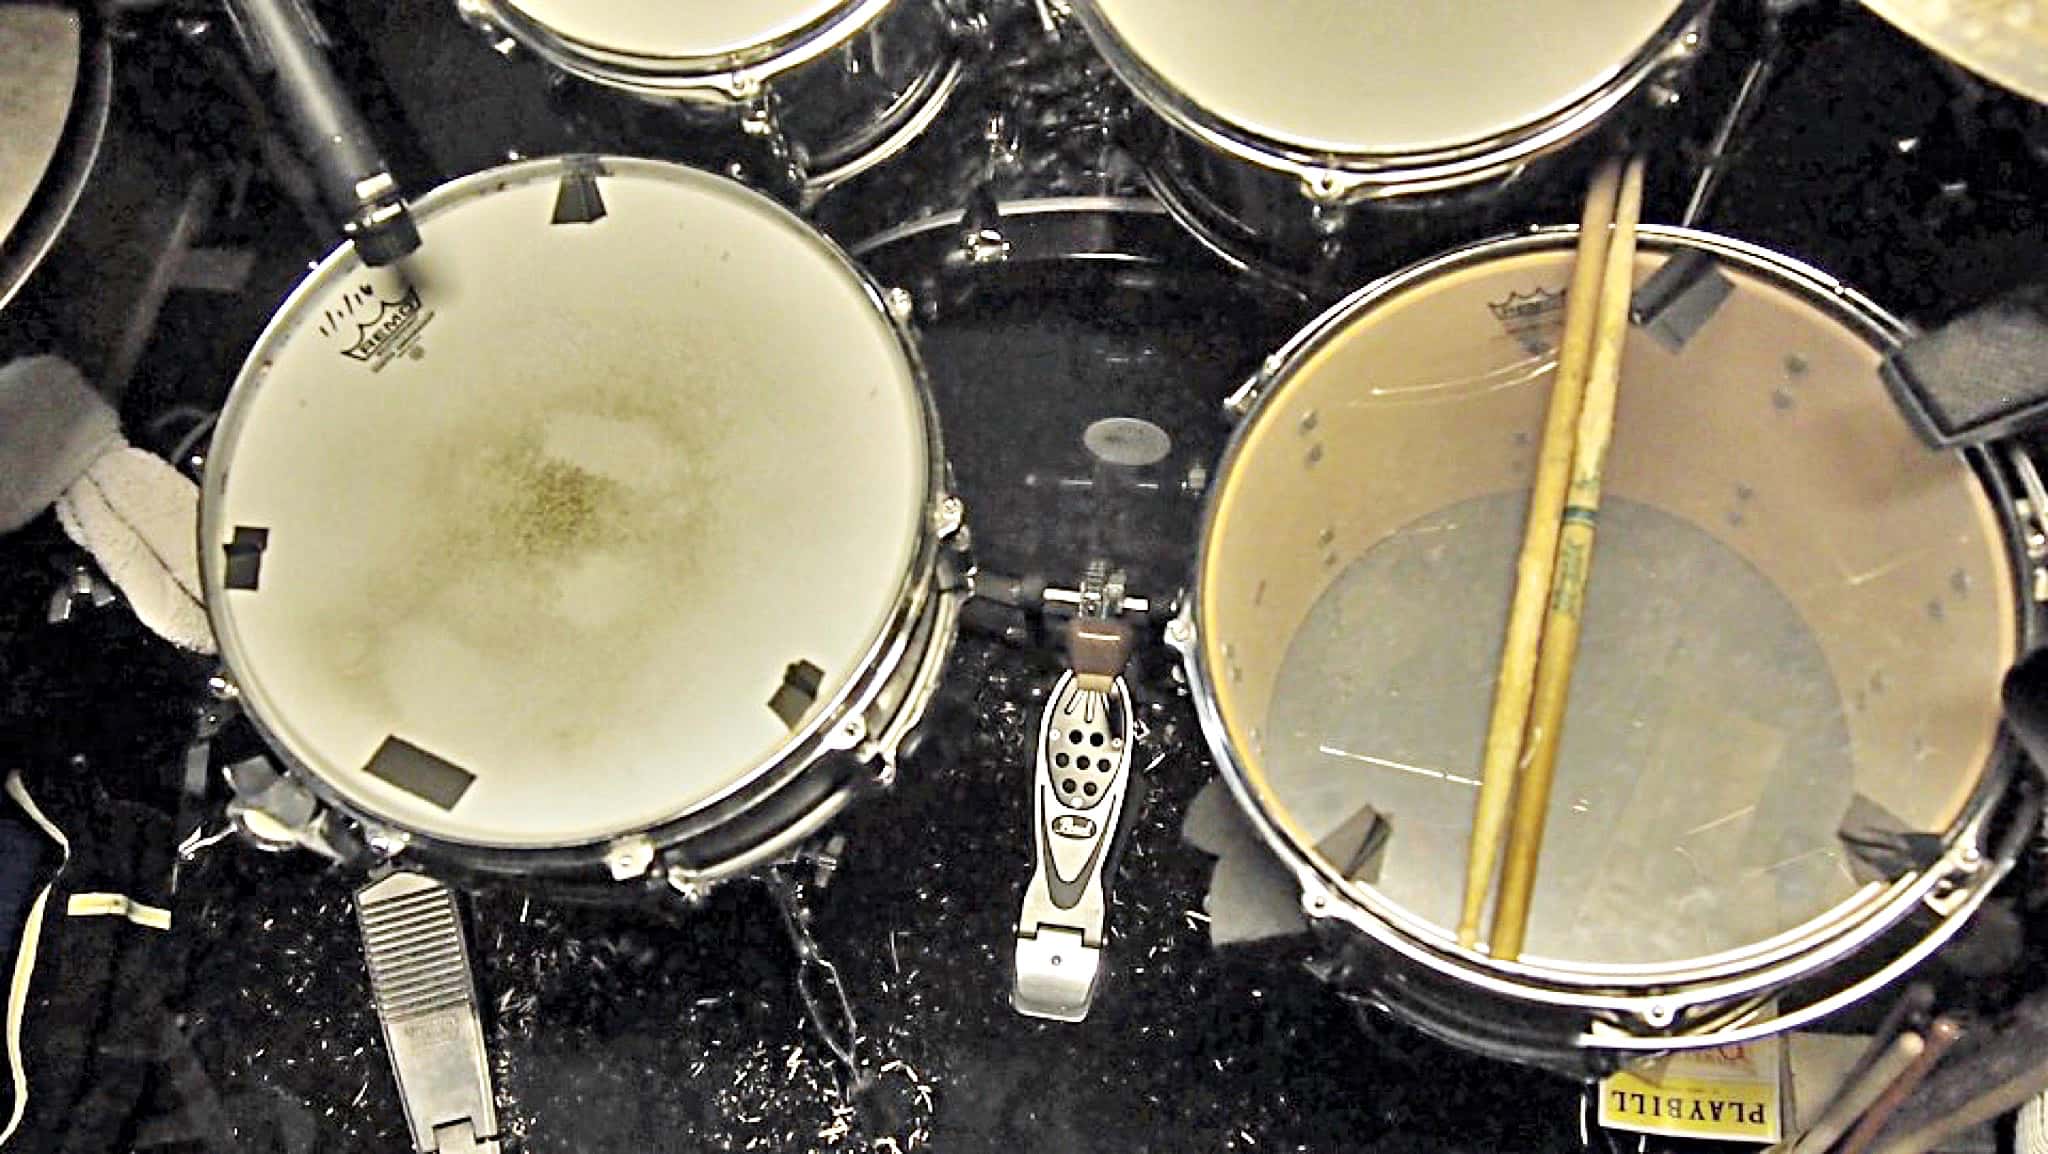 Perry Cavari's drum set setup for the Broadway production of Something Rotten at the St James Theatre.